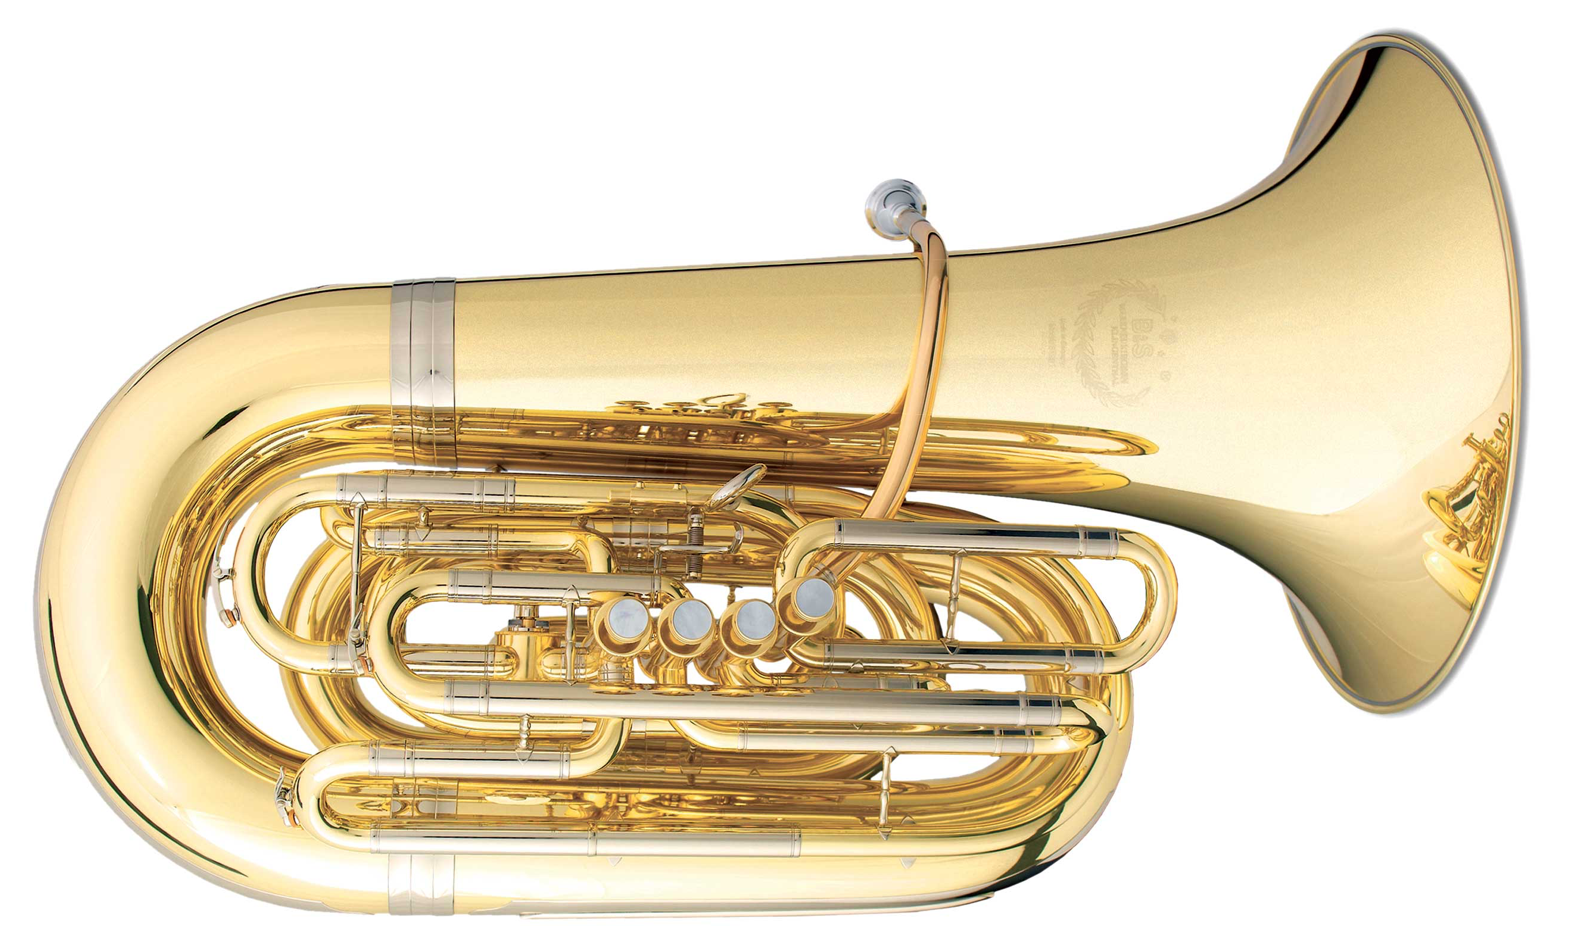 The Bu0026S Gr41 Is A Very Popular 4/4 Cc Tuba And Is Versatile Being Numble For The Smaller Ensemble, But Able To Keep Up With The Larger Enemble Demands. - Tuba, Transparent background PNG HD thumbnail